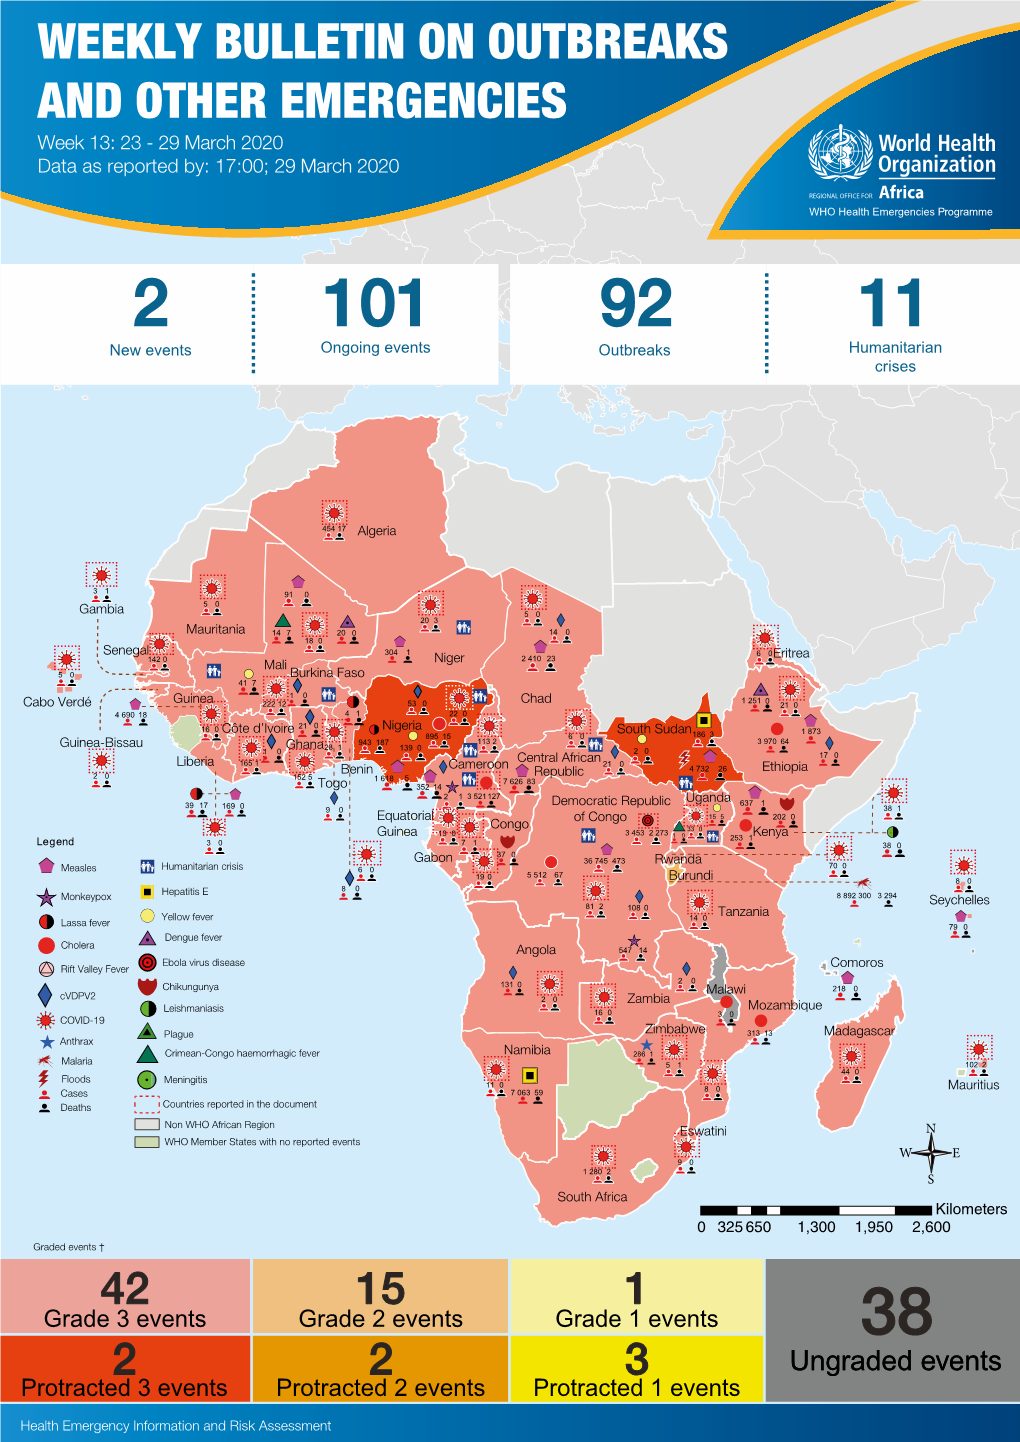 WEEKLY BULLETIN on OUTBREAKS and OTHER EMERGENCIES Week 13: 23 - 29 March 2020 Data As Reported By: 17:00; 29 March 2020